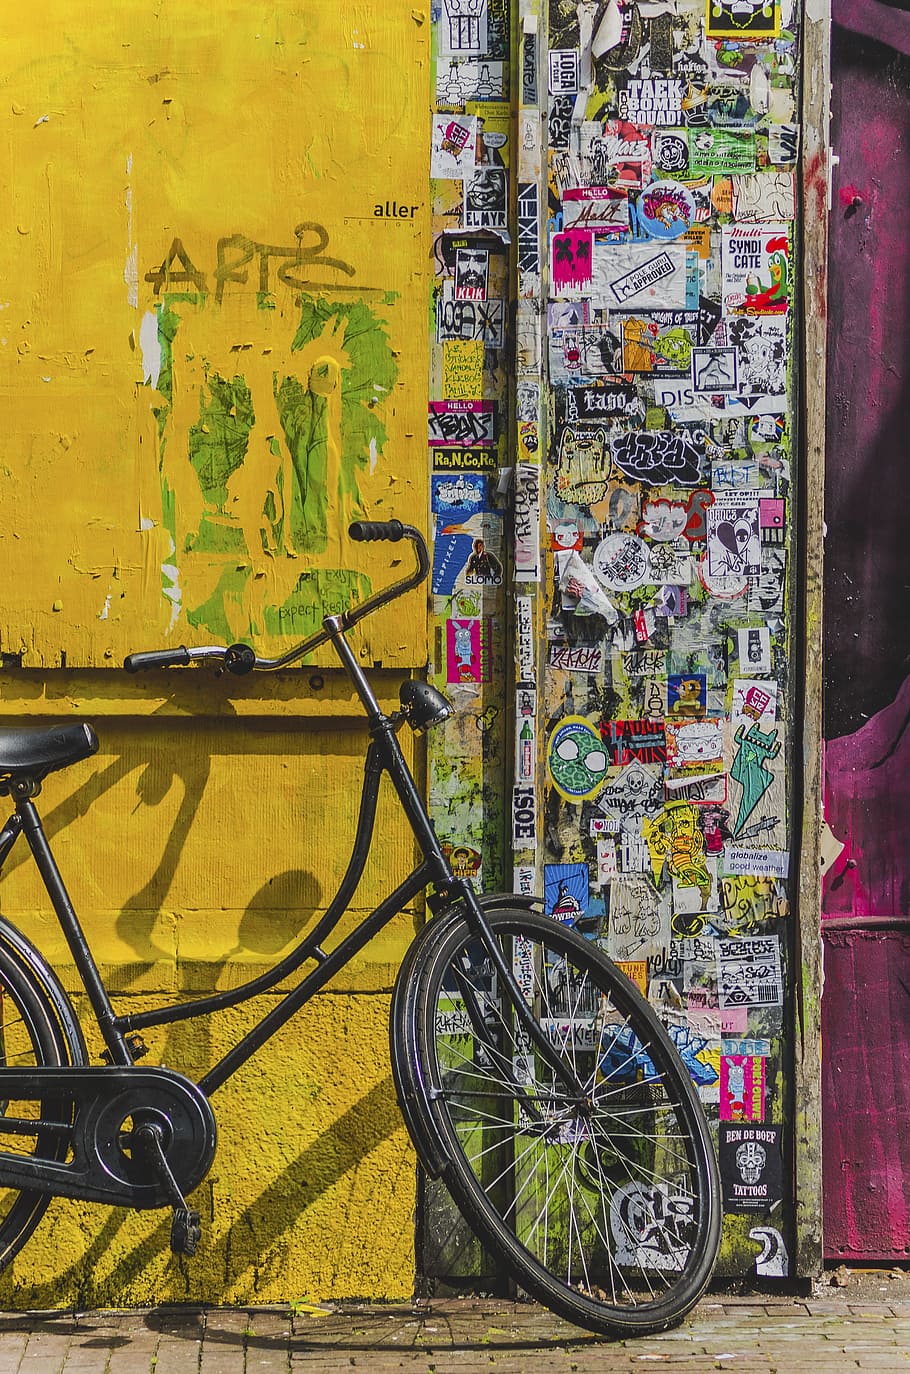 bicycle, bike, aesthetic, stickers, vandalism, paper, sign, wall, transportation, mode of transportation